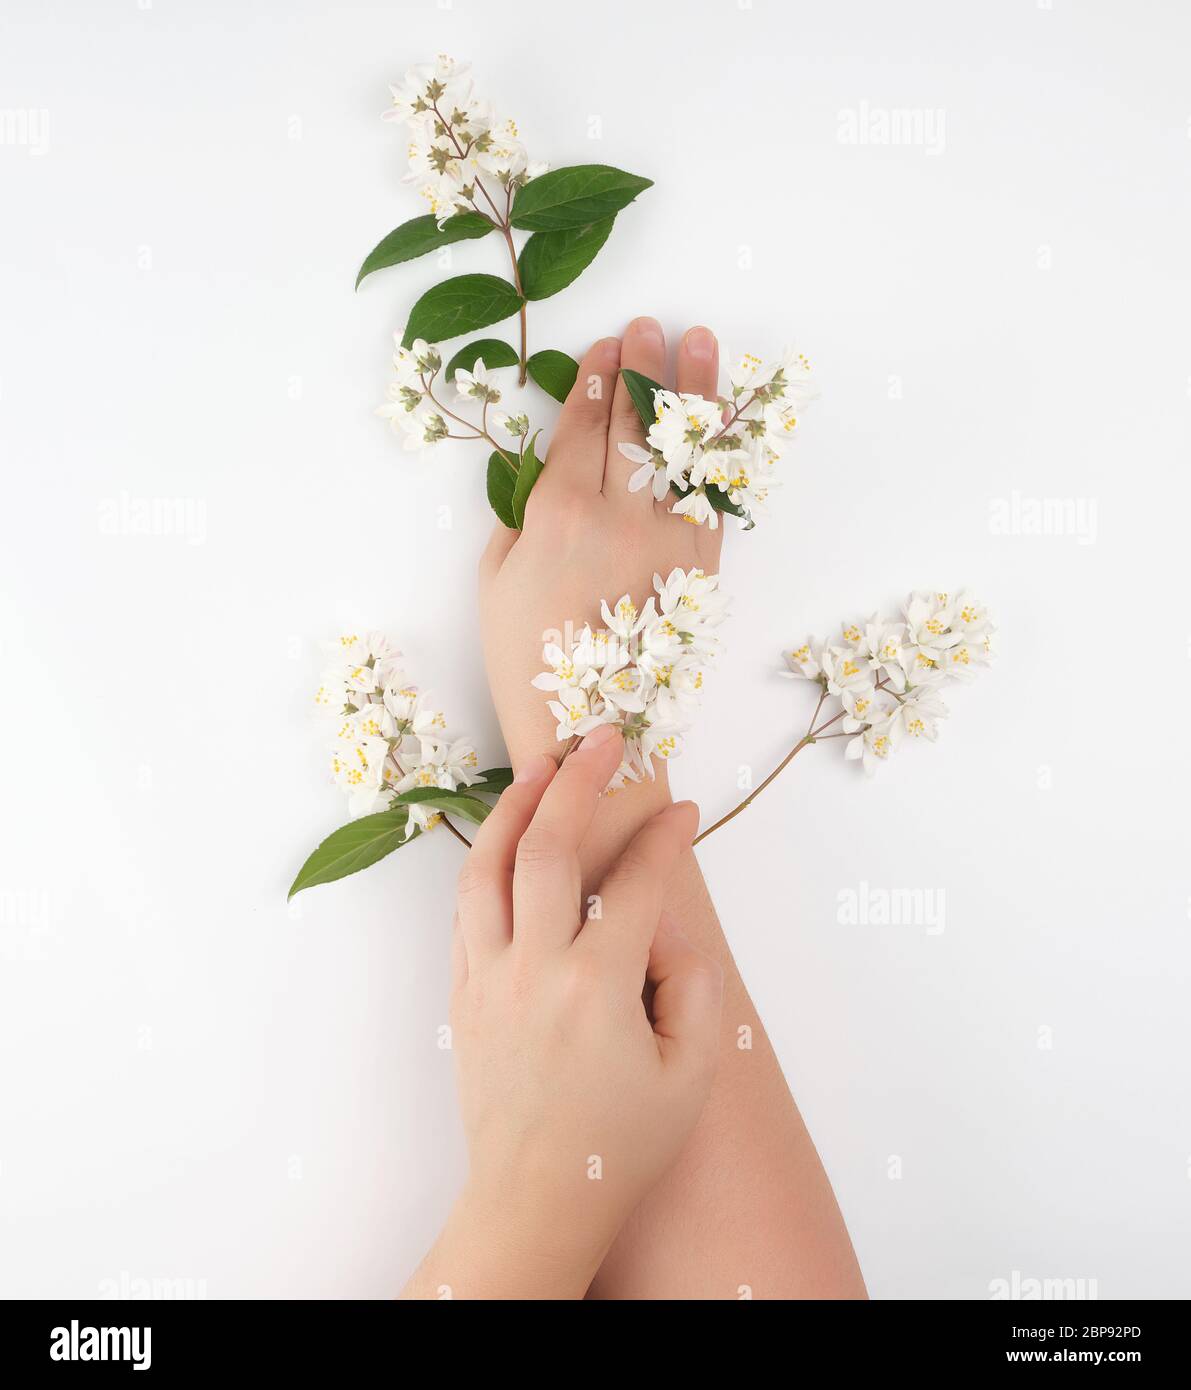 two female hands and small white flowers on a white background, fashionable concept for hand skin care, anti-aging care, spa treatments Stock Photo